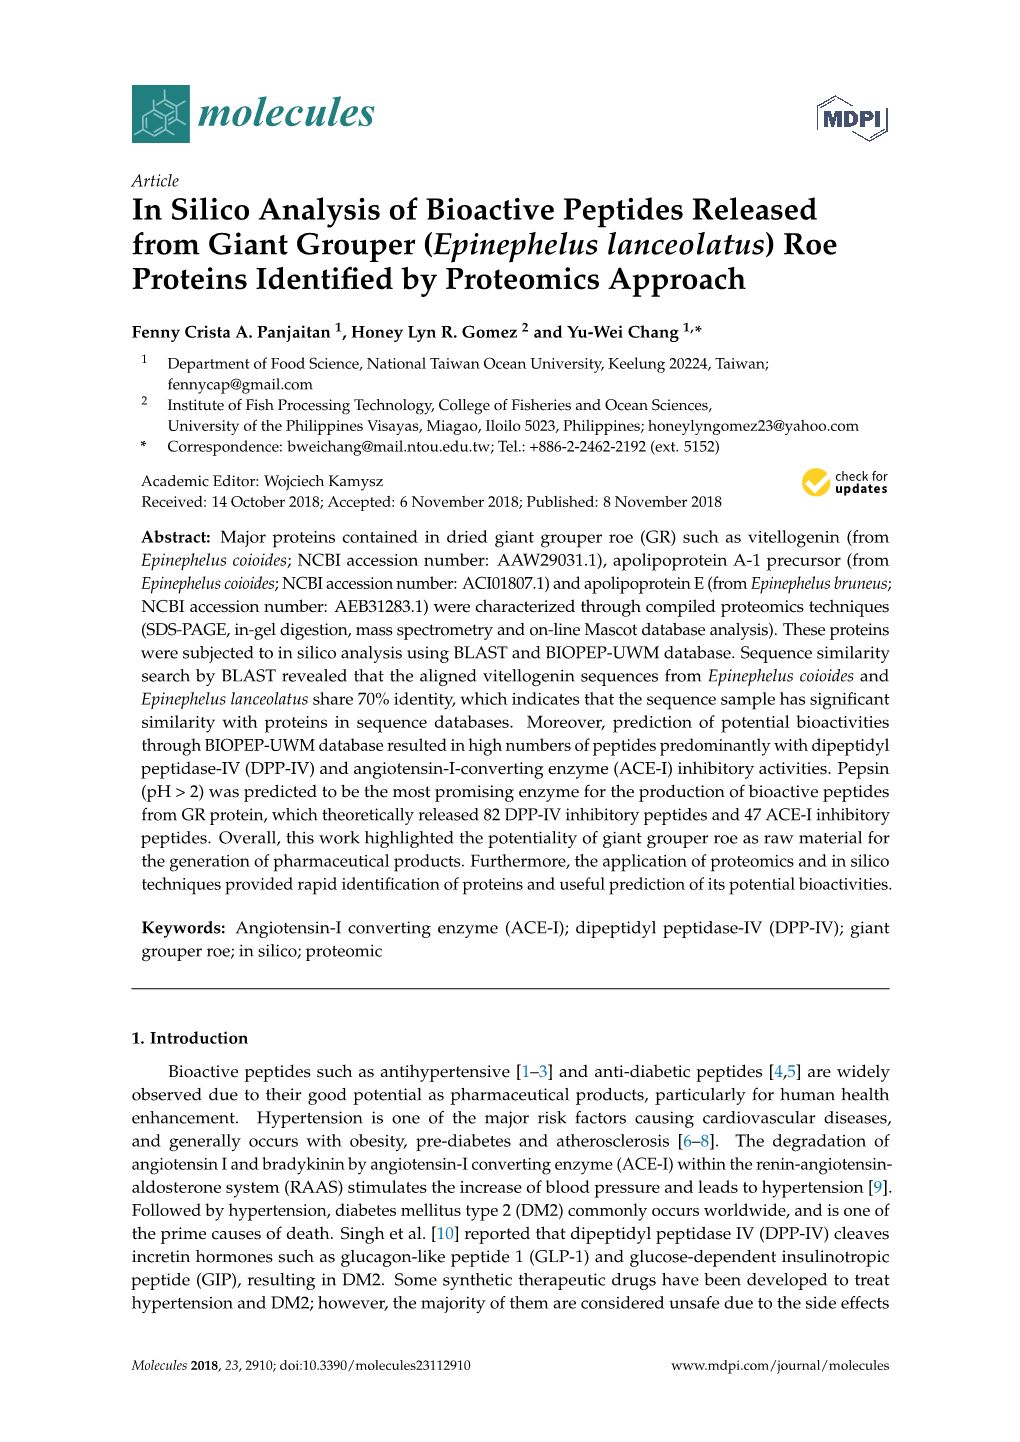 In Silico Analysis of Bioactive Peptides Released from Giant Grouper (Epinephelus Lanceolatus) Roe Proteins Identiﬁed by Proteomics Approach